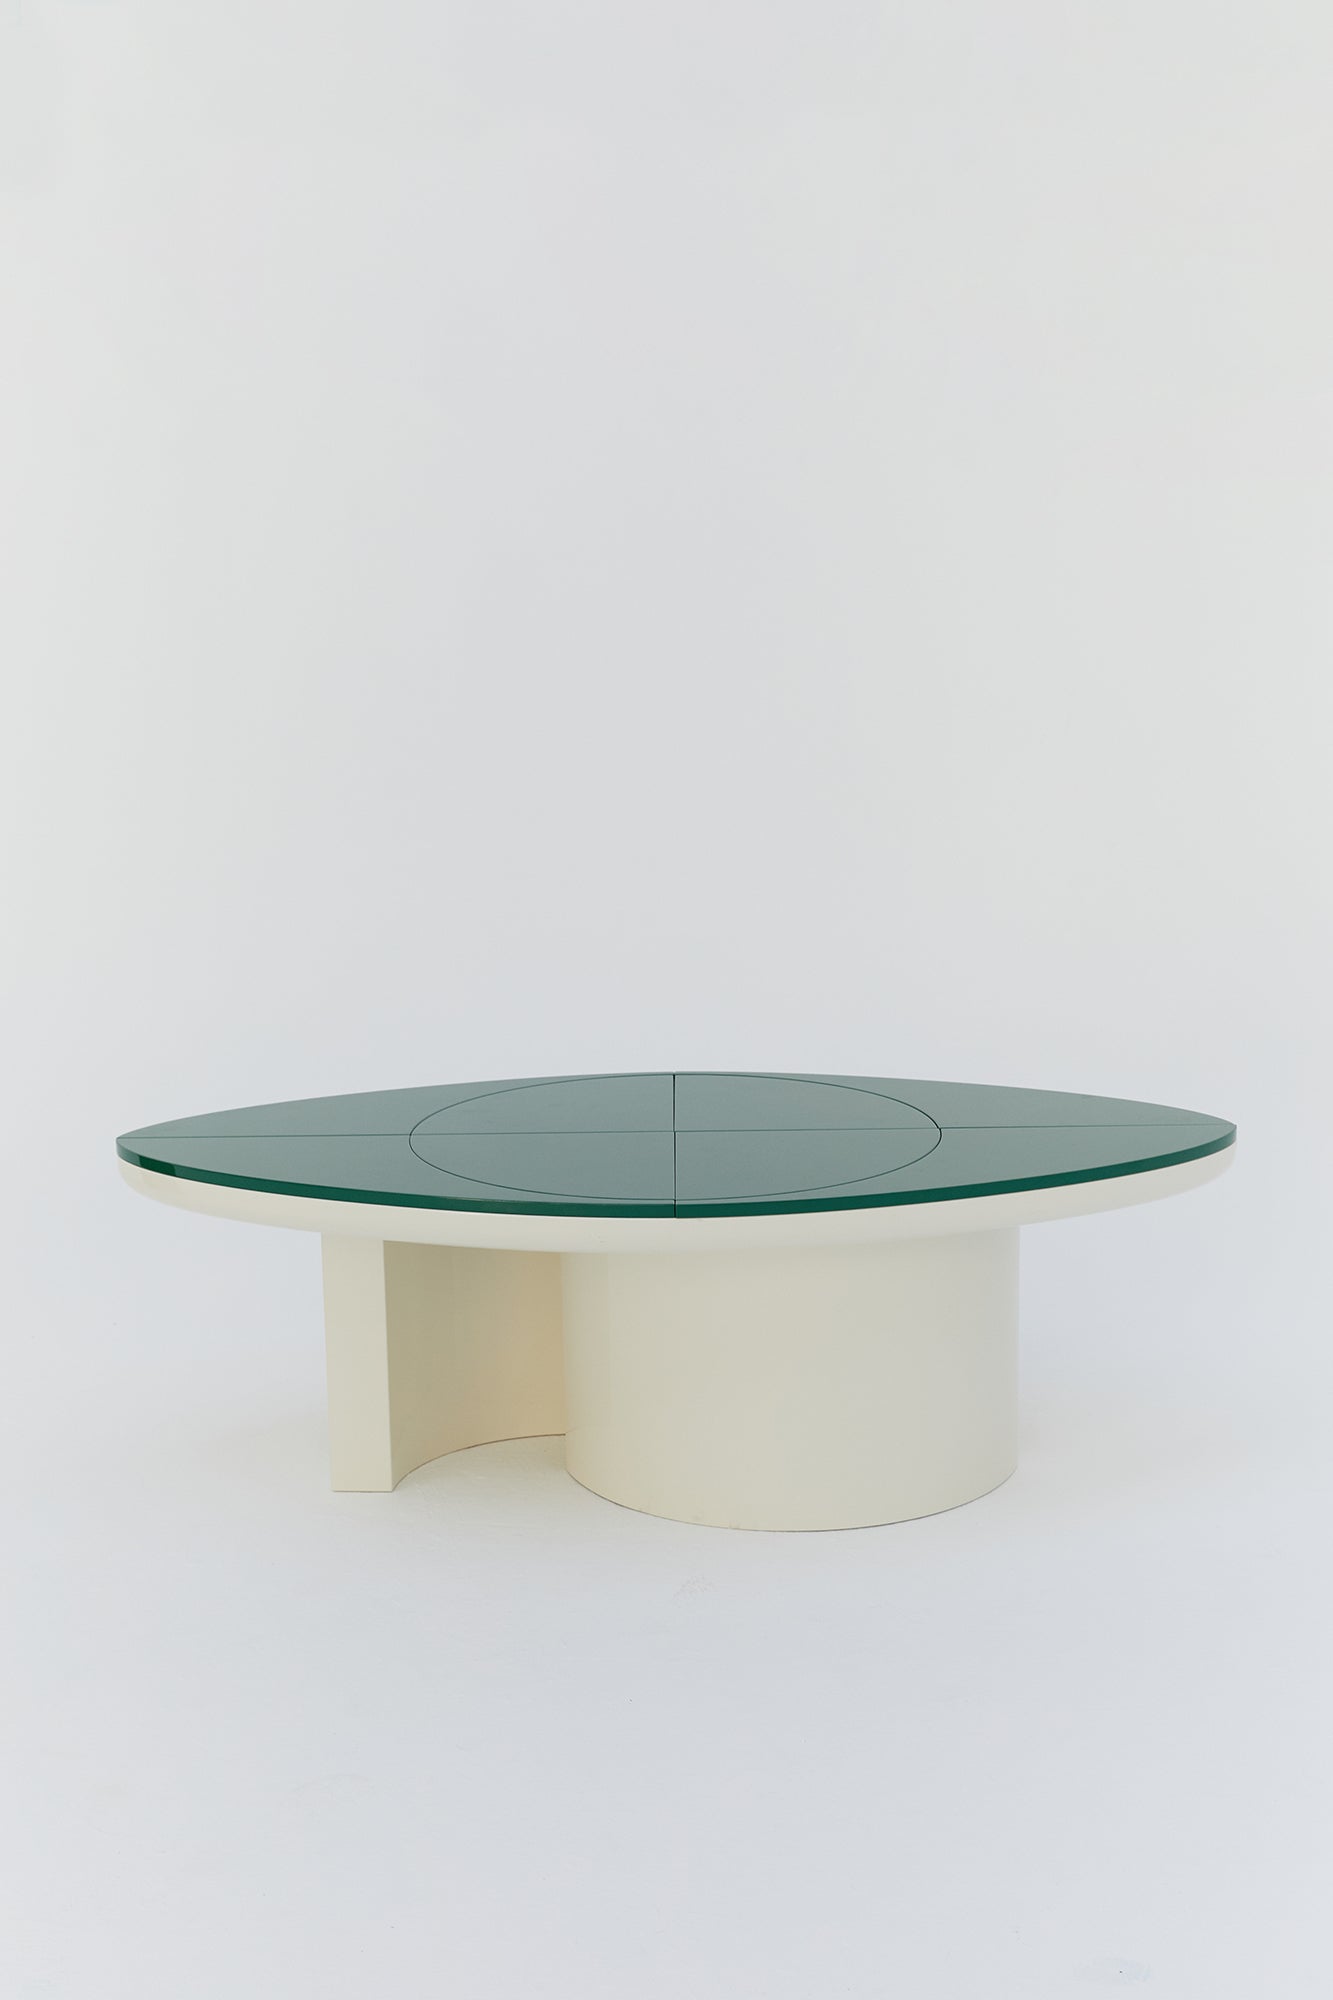 Shiny Laquered Green Table